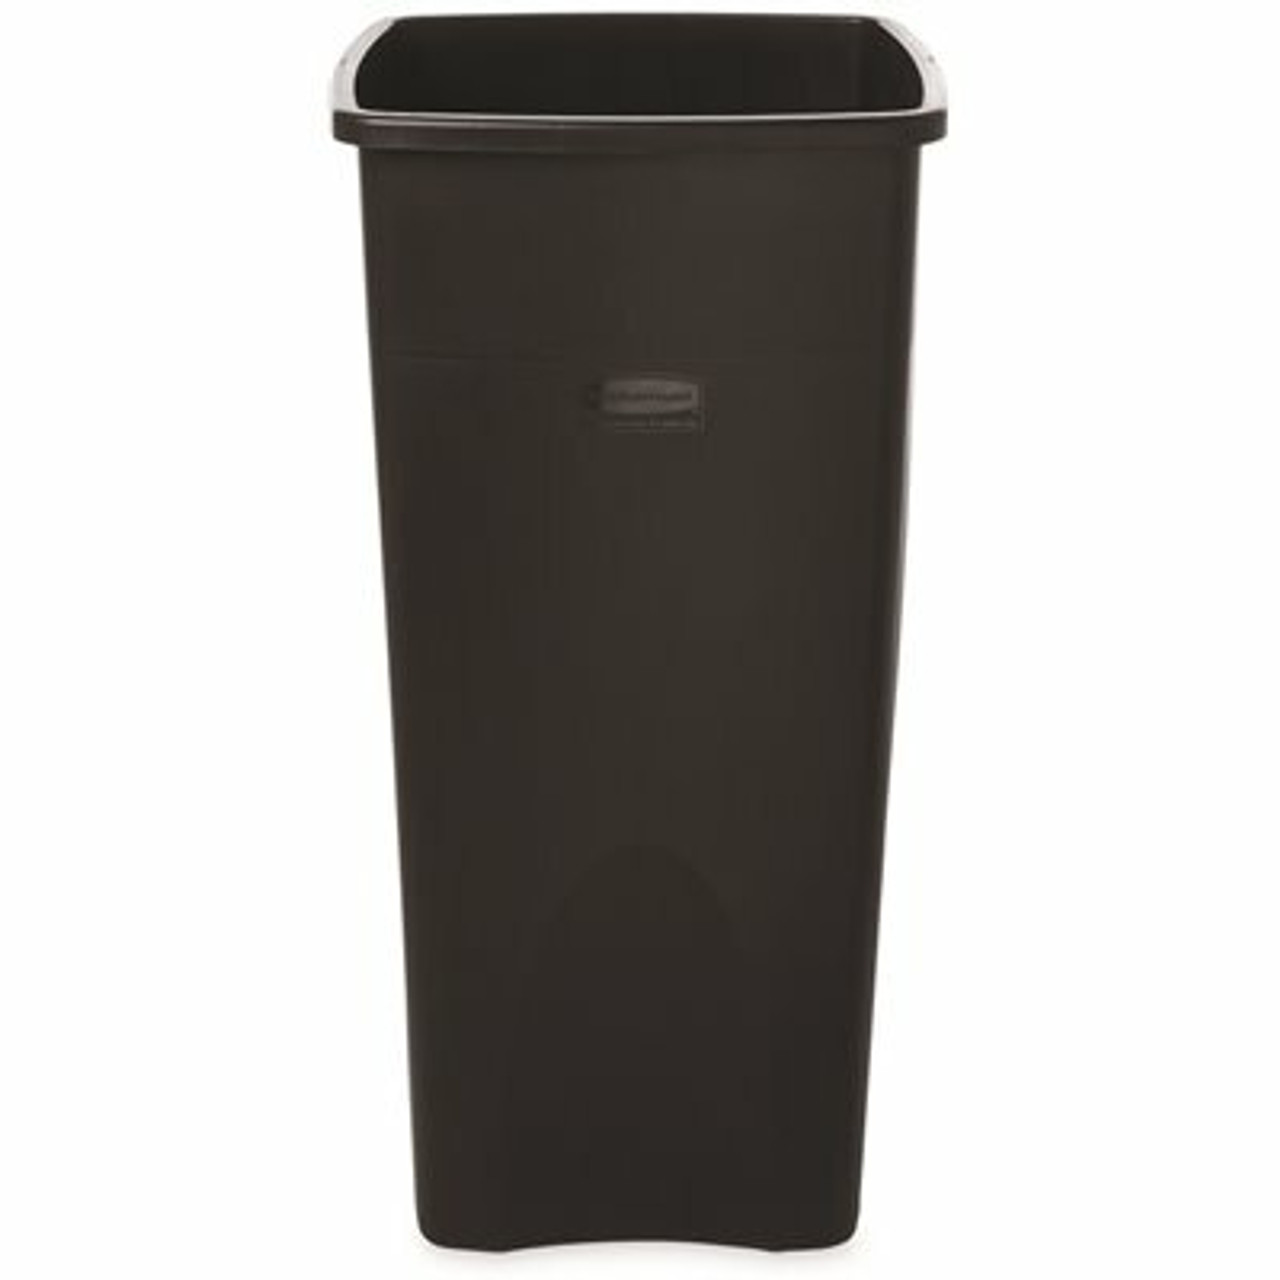 Rubbermaid Commercial Products Untouchable 23 Gal. Black Square Trash Can